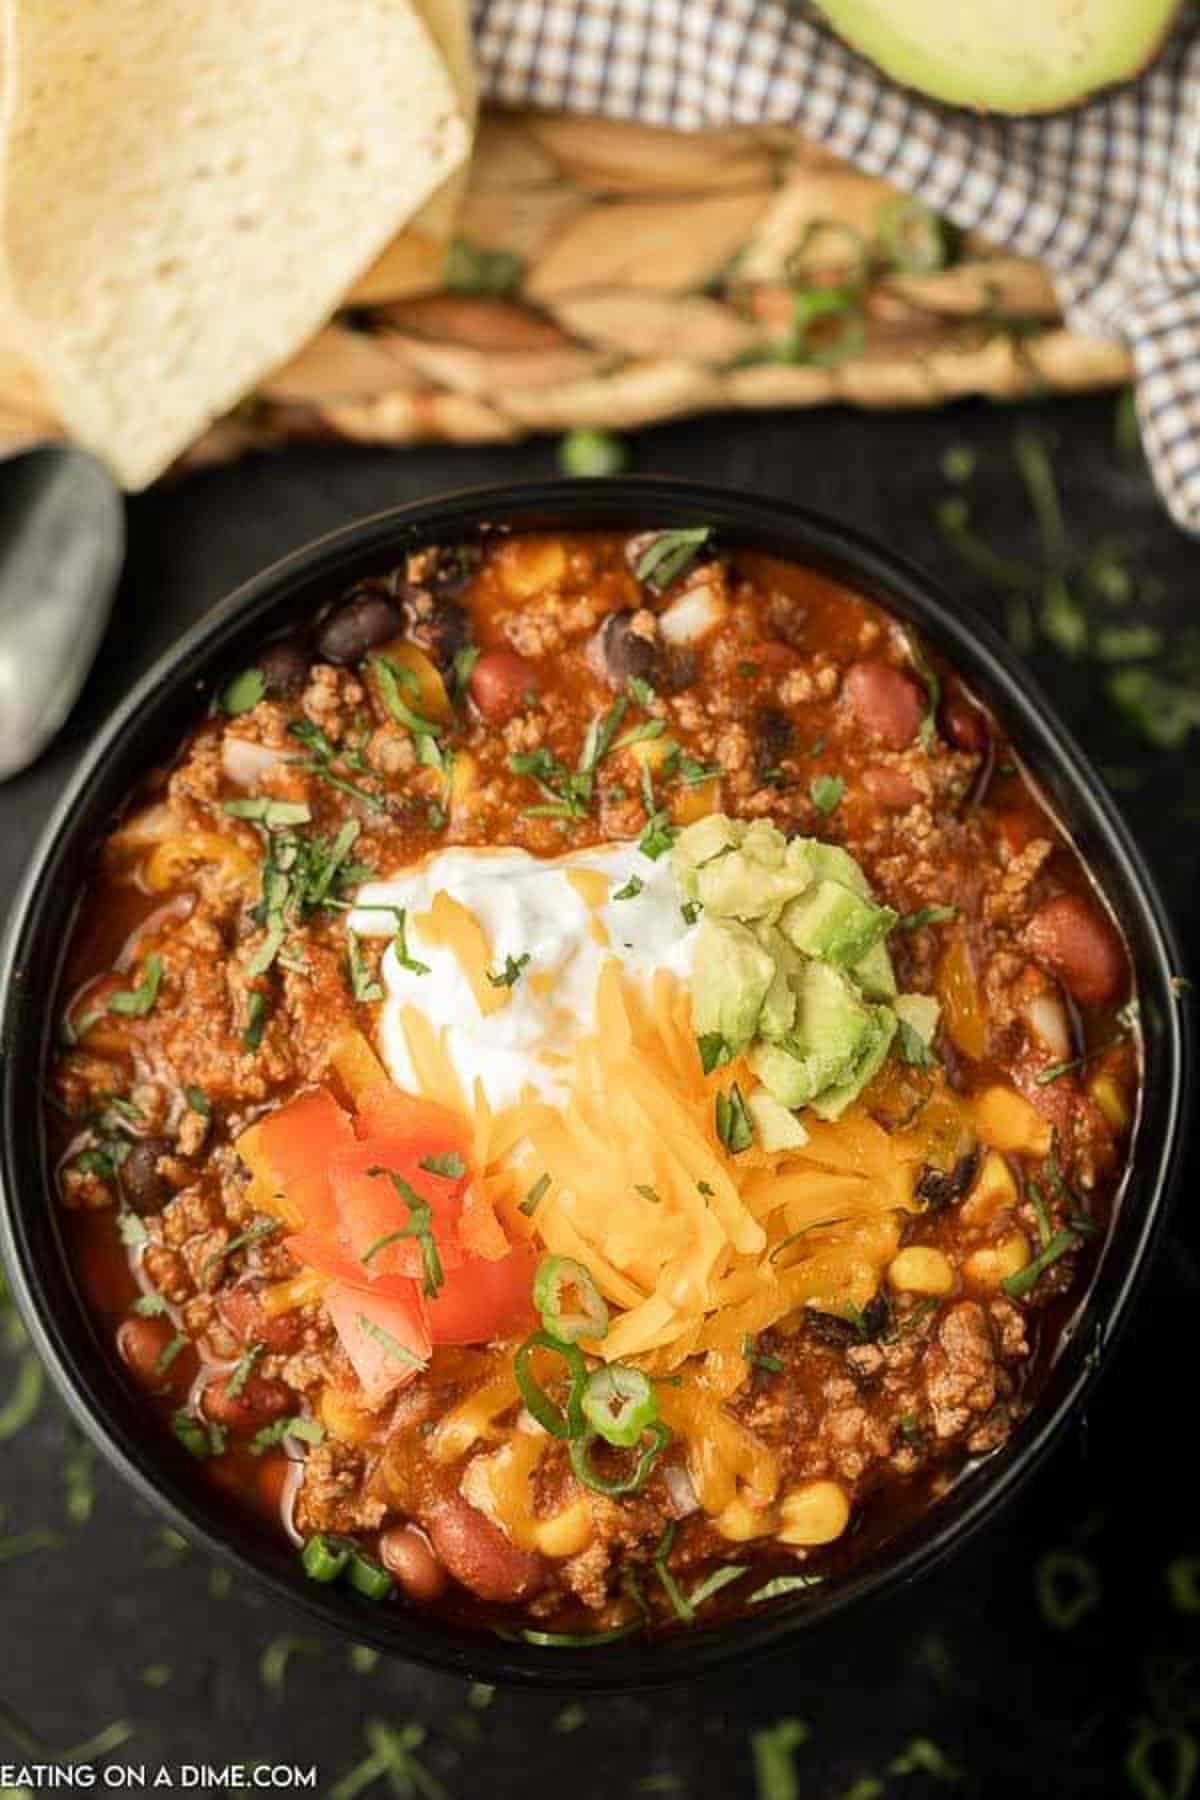 A bowl of taco chili topped with sour cream, shredded cheese, diced avocado, diced tomatoes and chopped cilantro.  